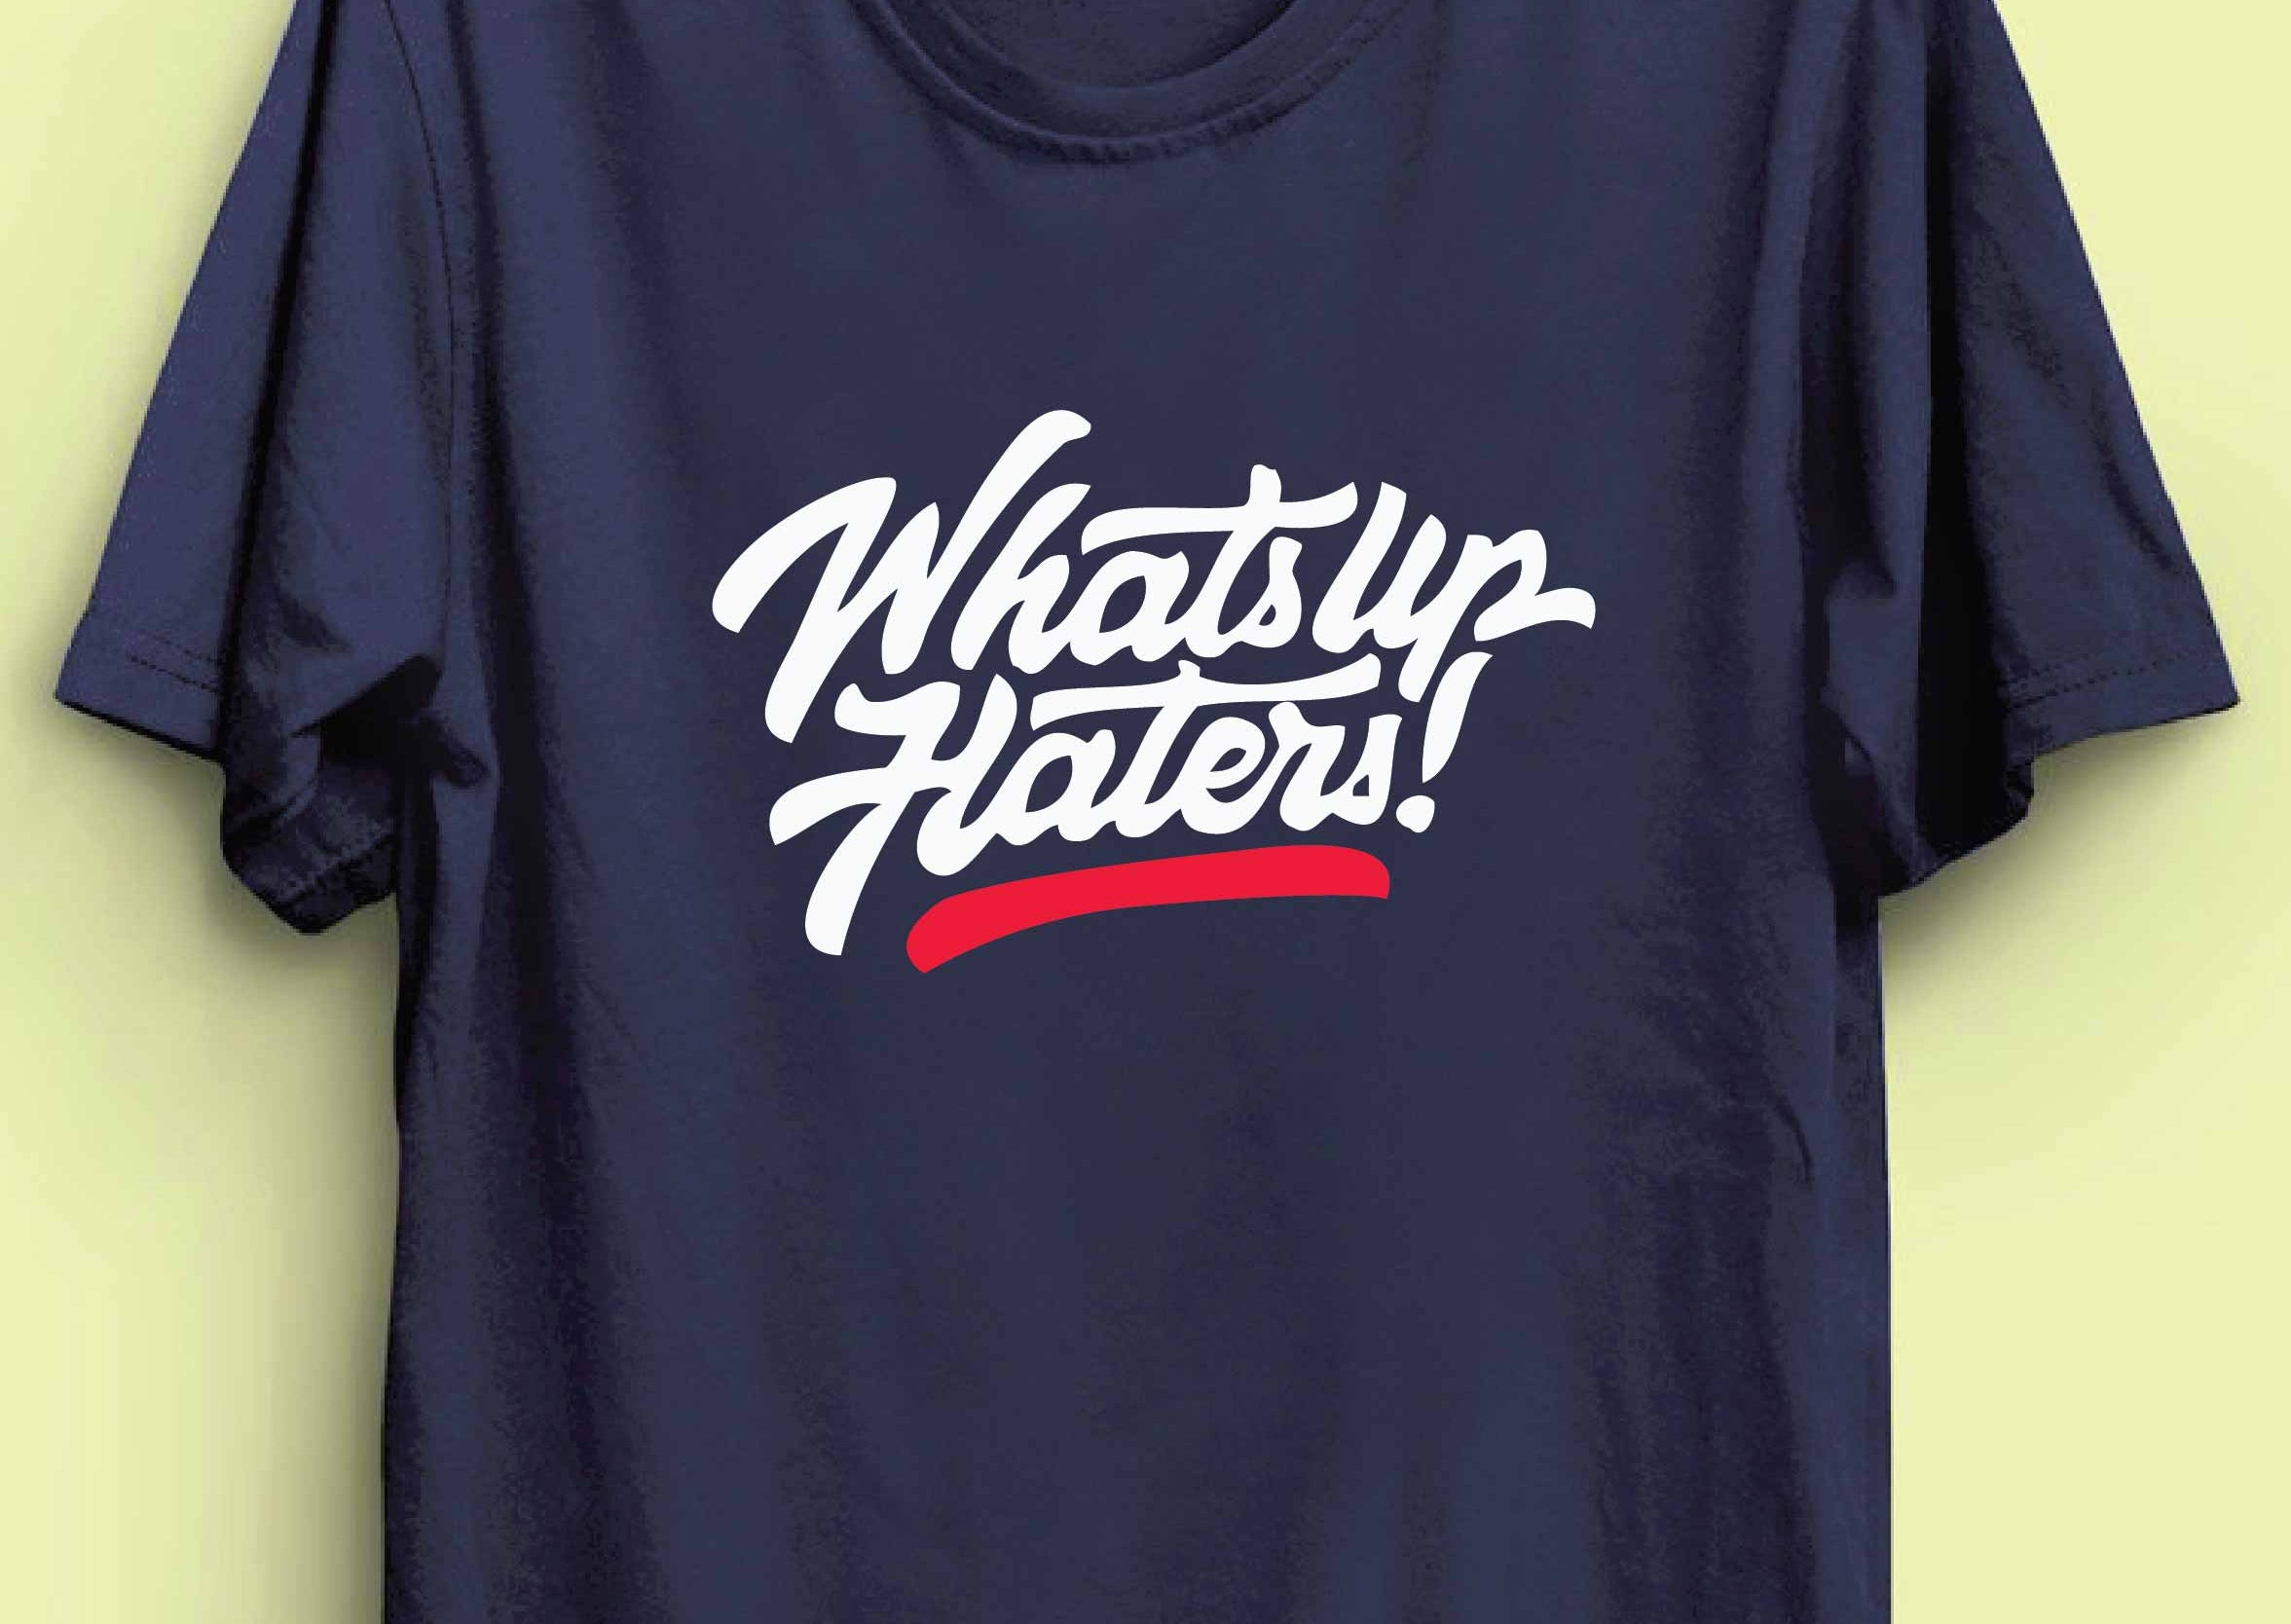 Whats Up Haters Reactr Tshirts For Men - Eyewearlabs